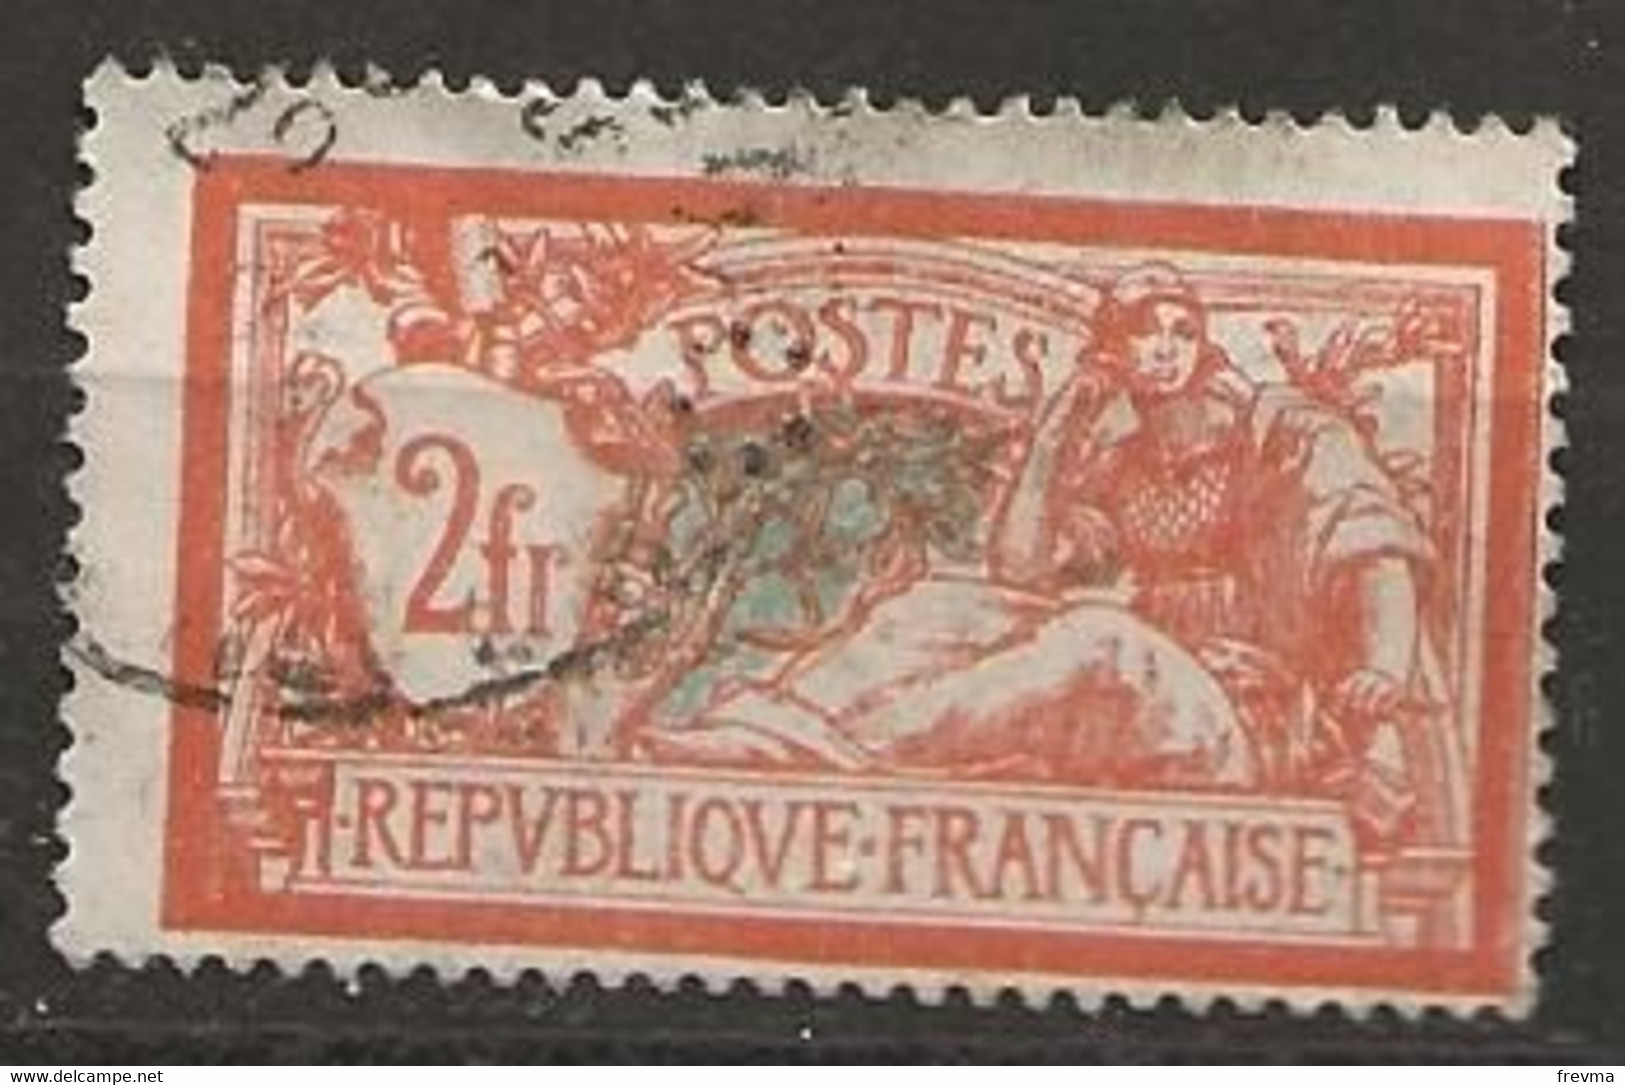 Timbre France 1907 N° Yvt 145 Perforé En Petit Rond - Used Stamps